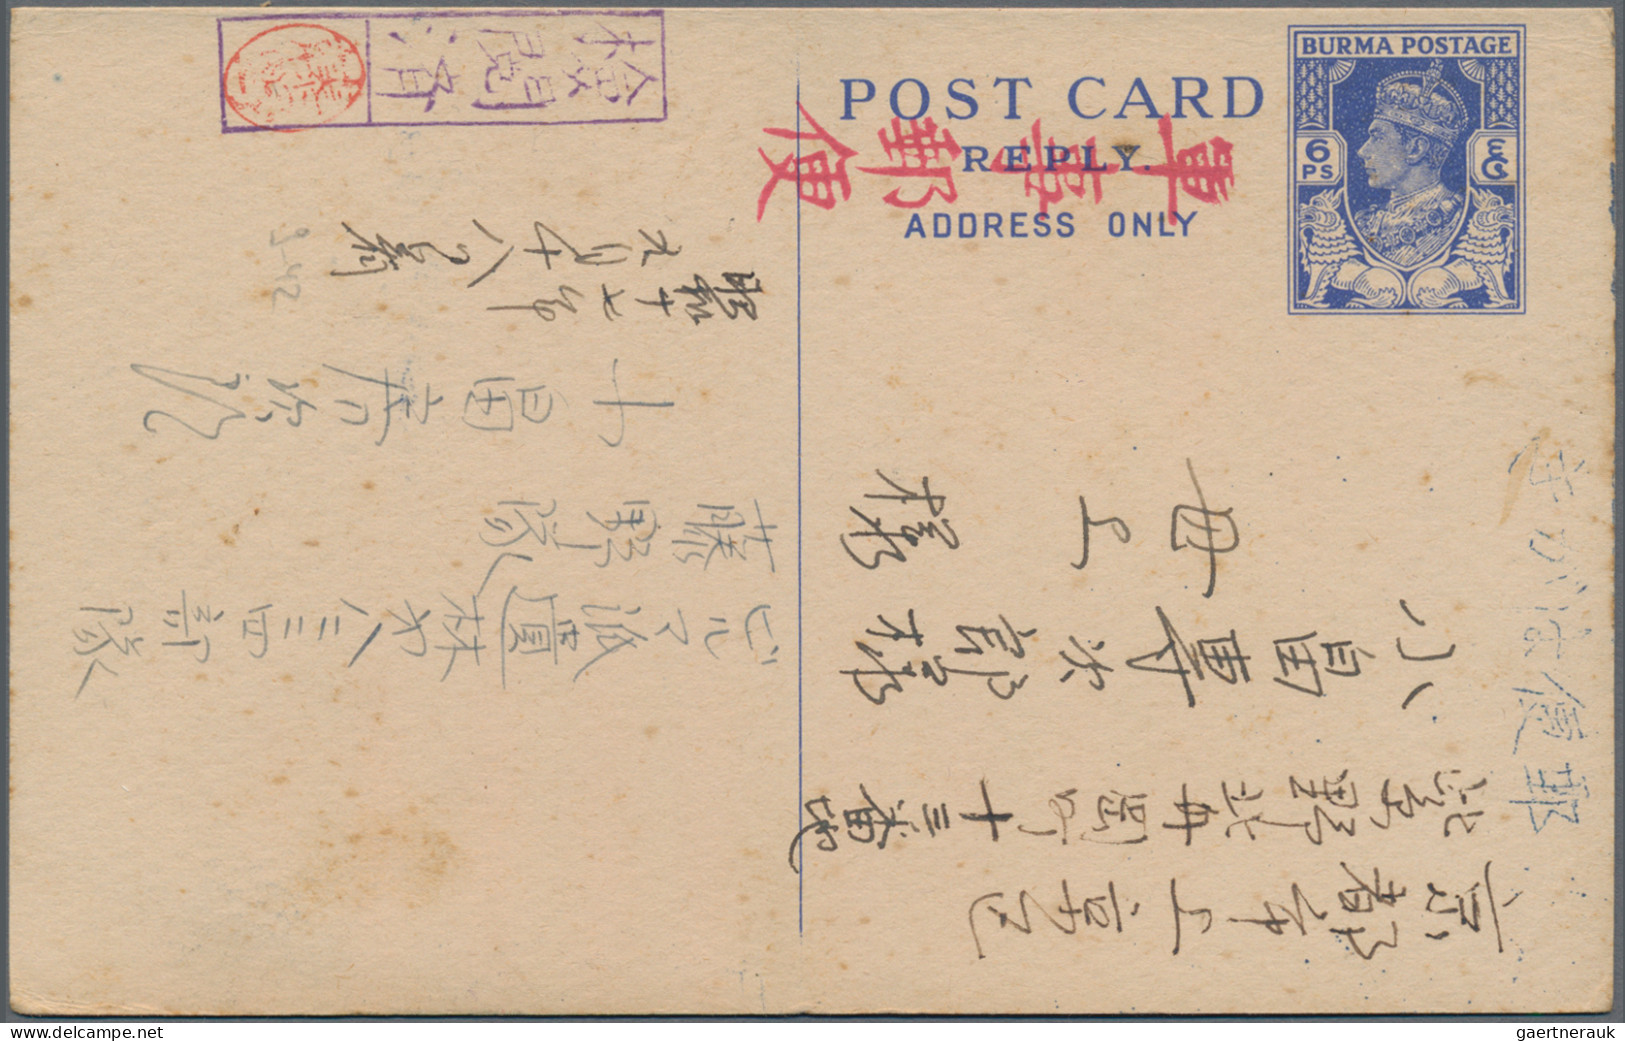 Japanese Occupation WWII: 1942/43, Reply Parts (2) Of KGVI Card 6 Ps. Blue Used - Myanmar (Burma 1948-...)